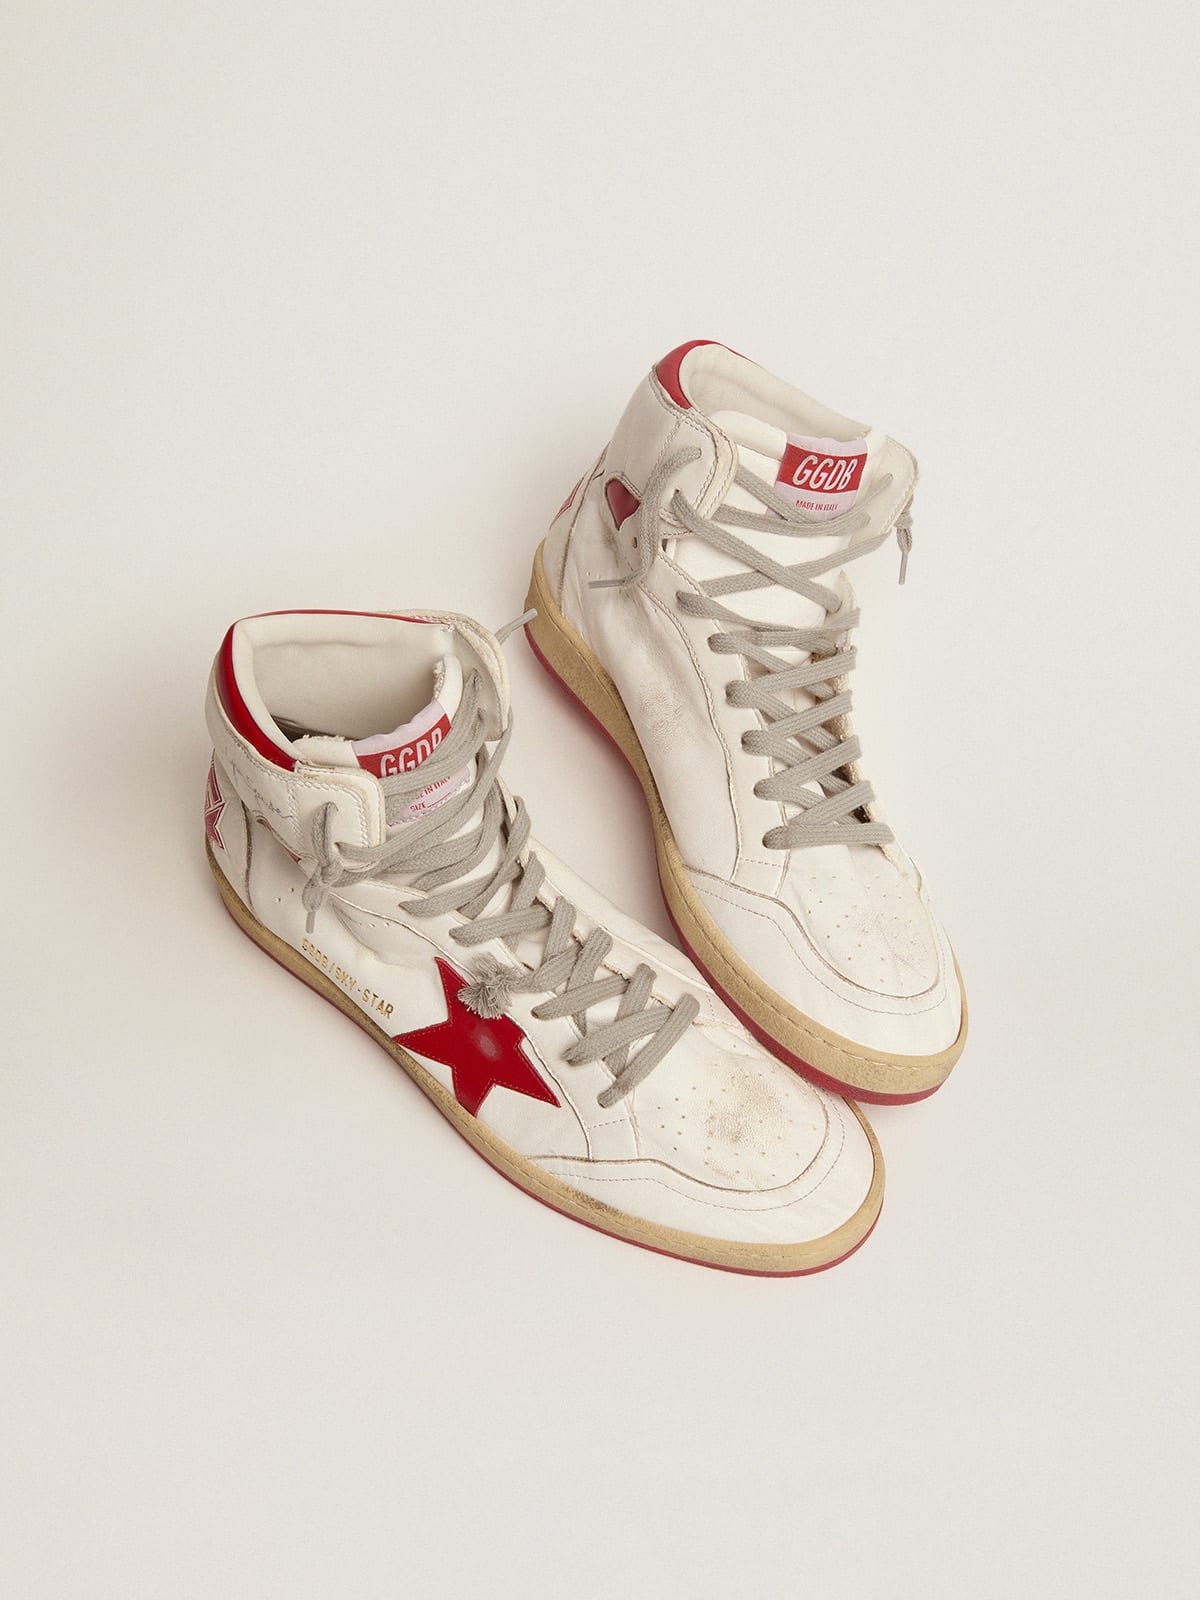 Golden Goose - Women's Sky-Star in white nappa with red star and heel tab in 